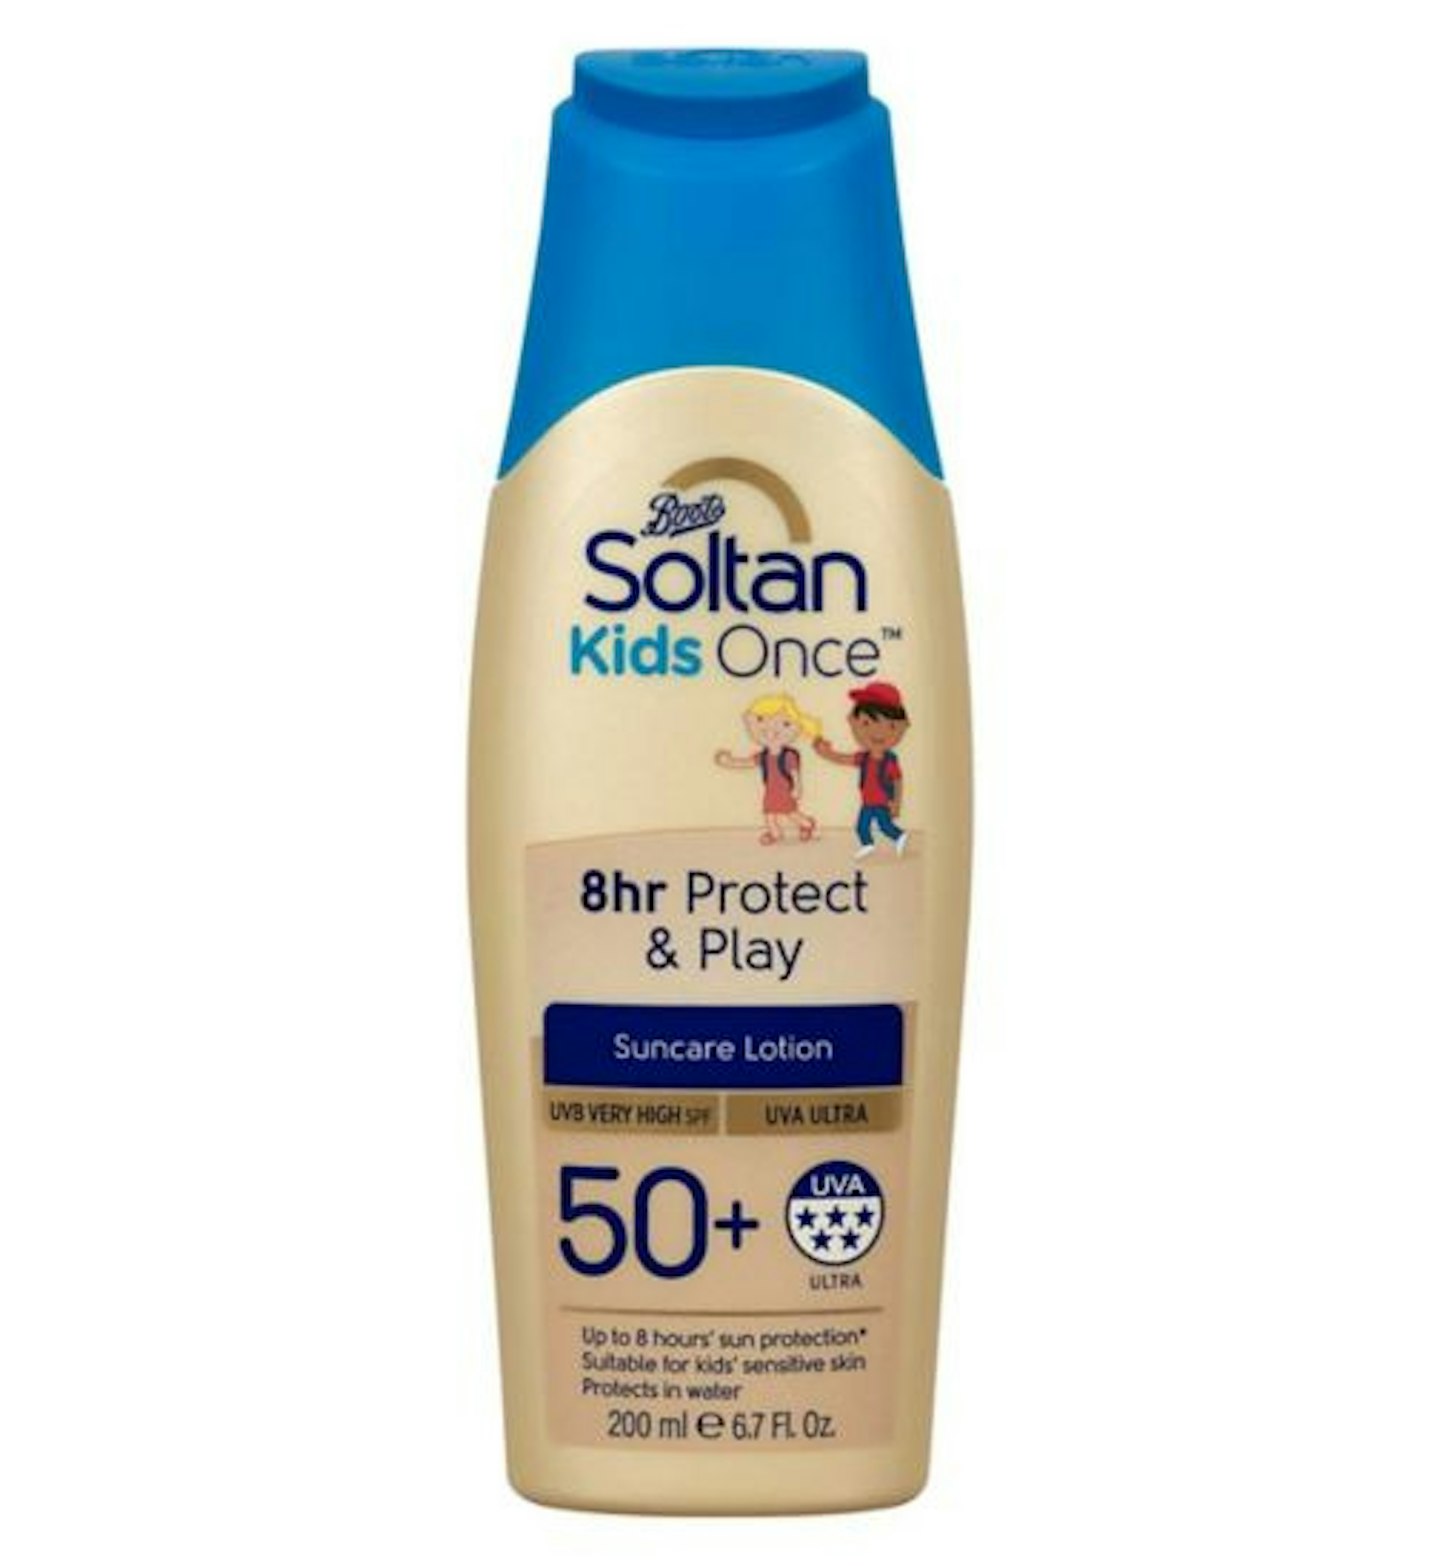 Soltan Kids Once 3hr Waterplay Lotion SPF50+